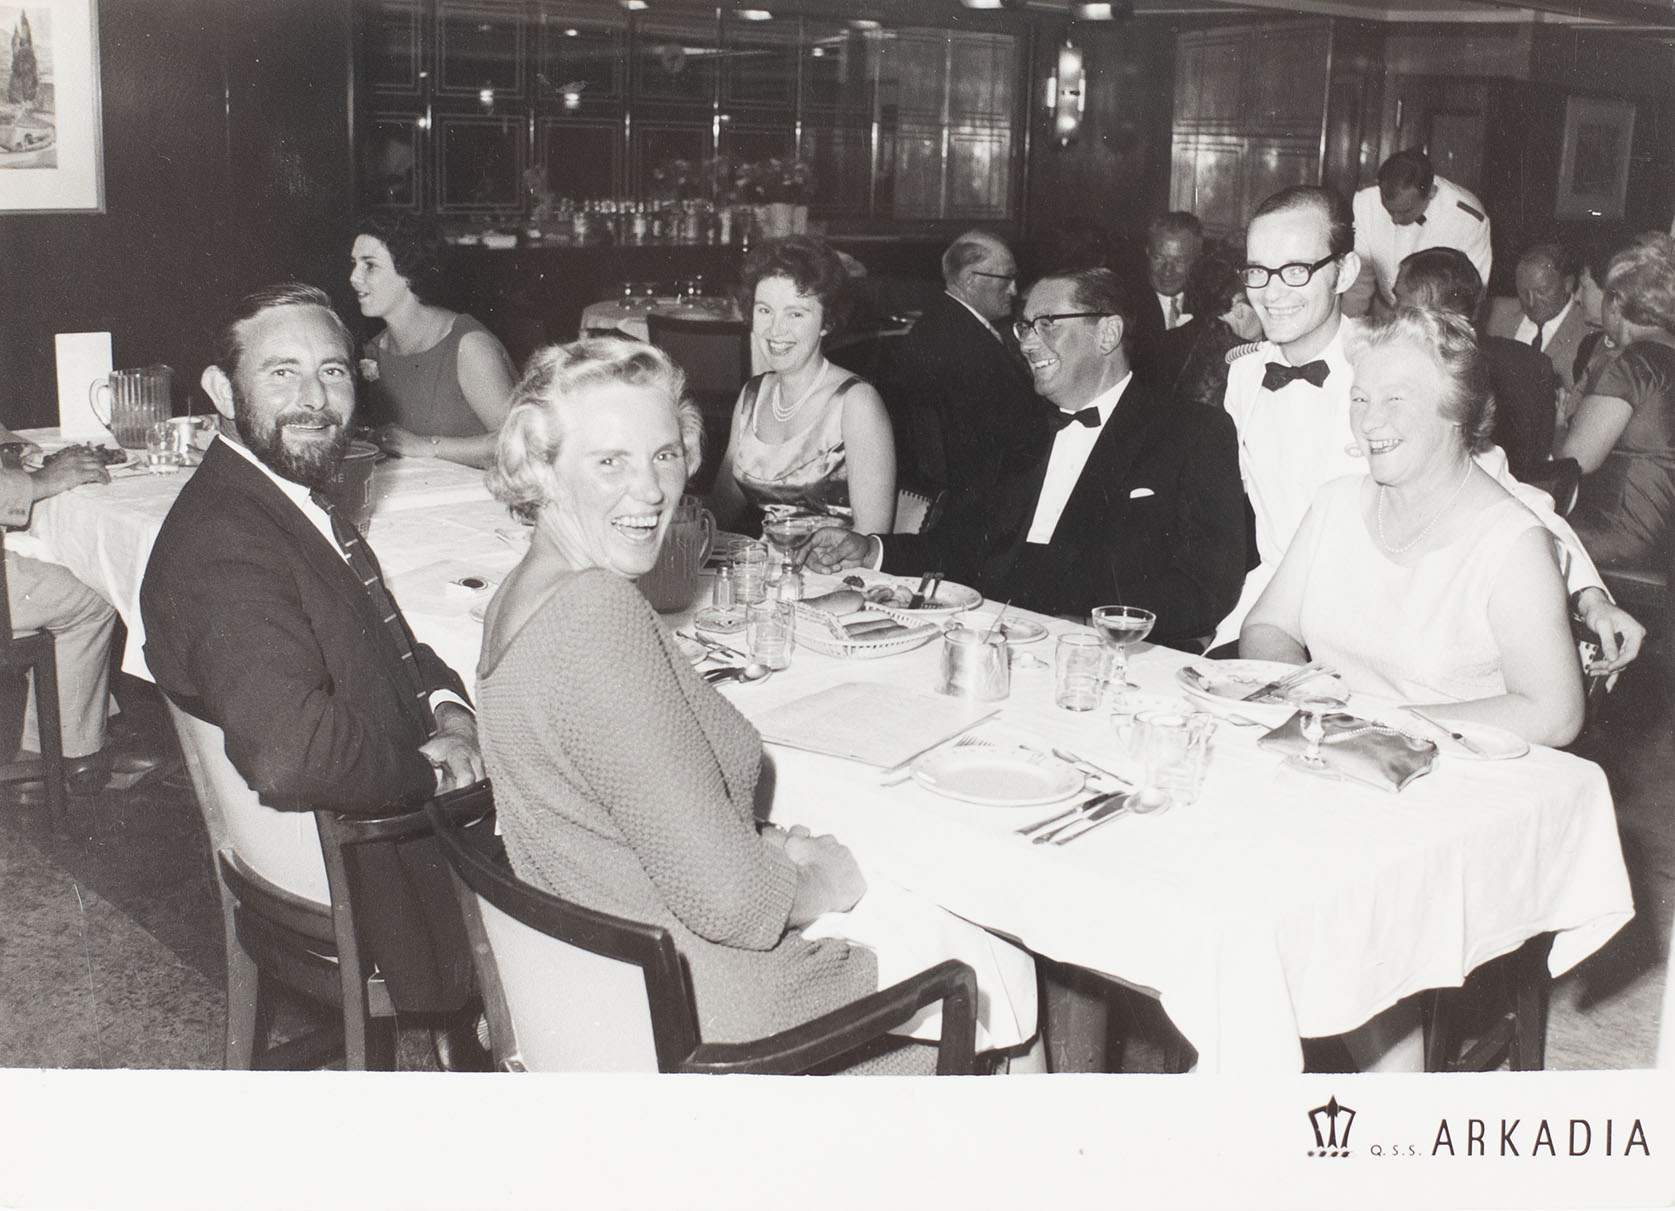 Photograph of a group at dinner on the cruise liner Q.S.S. Arkadia